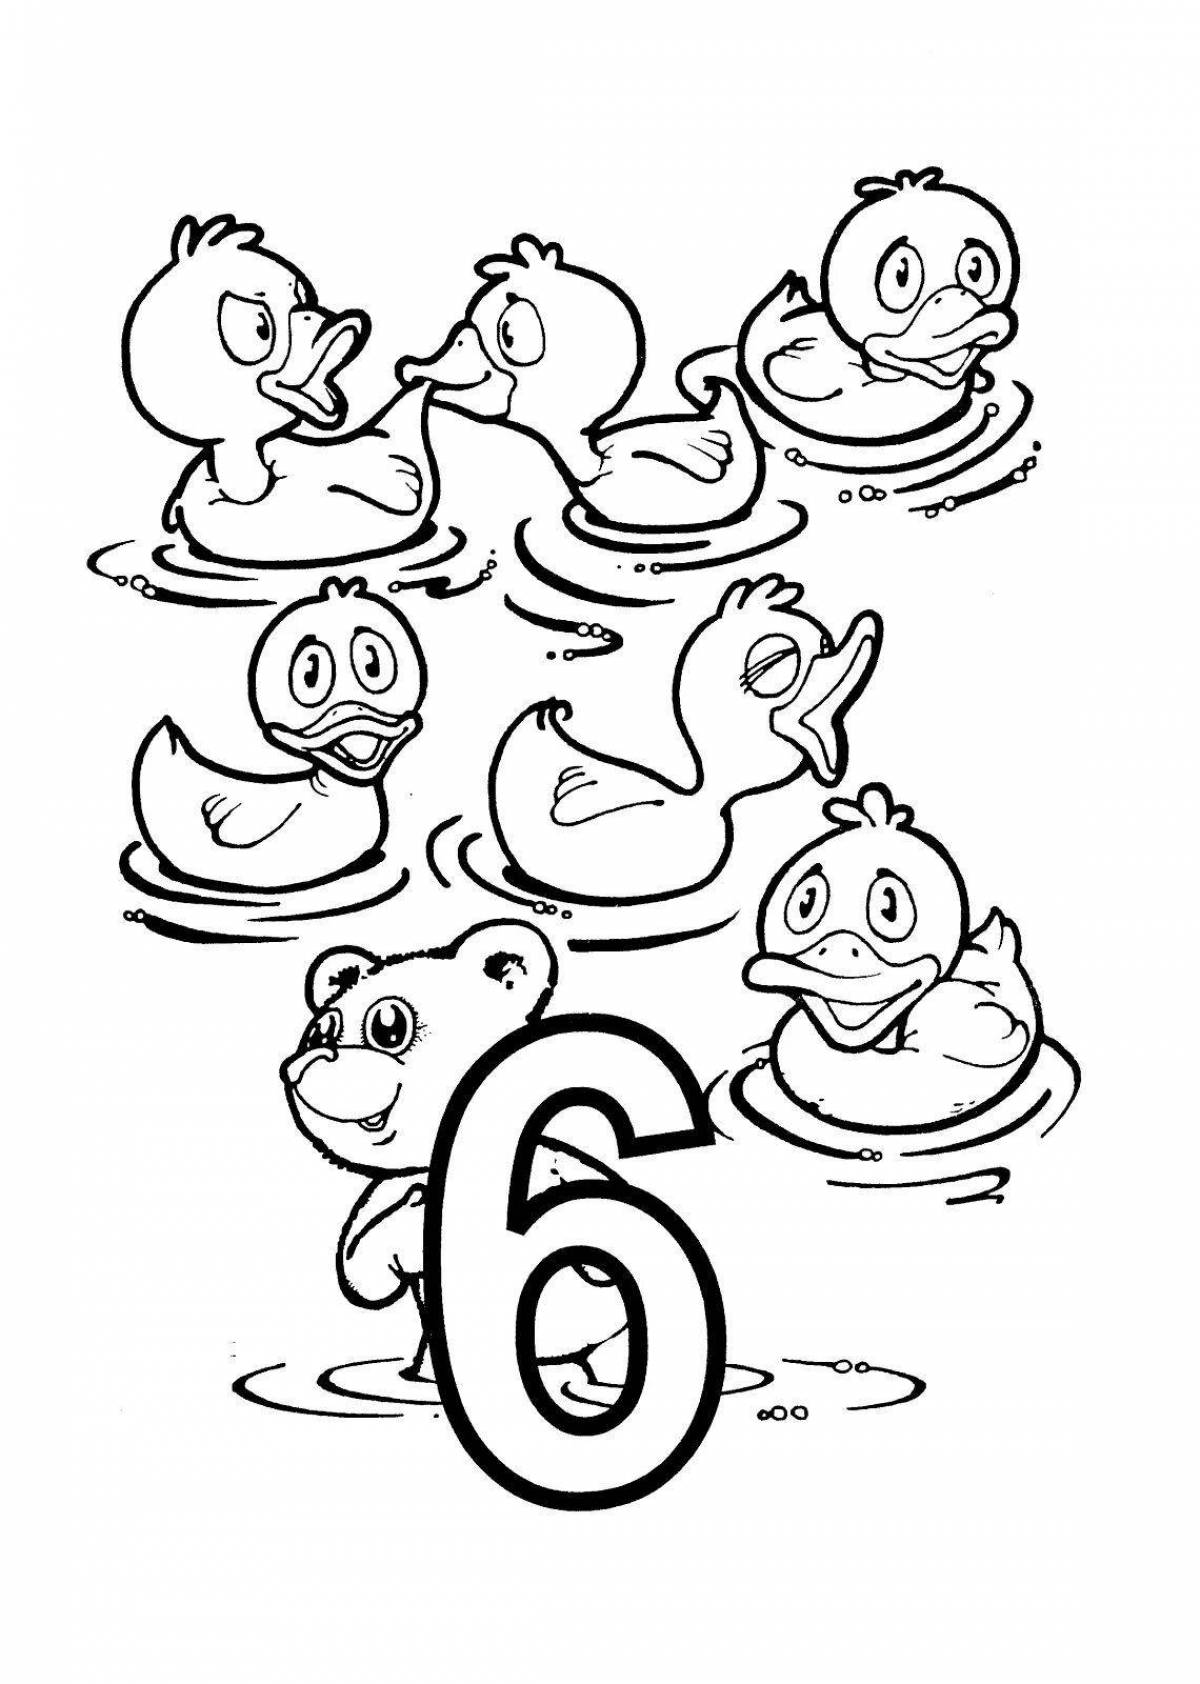 Coloring pages with playful numbers for kids